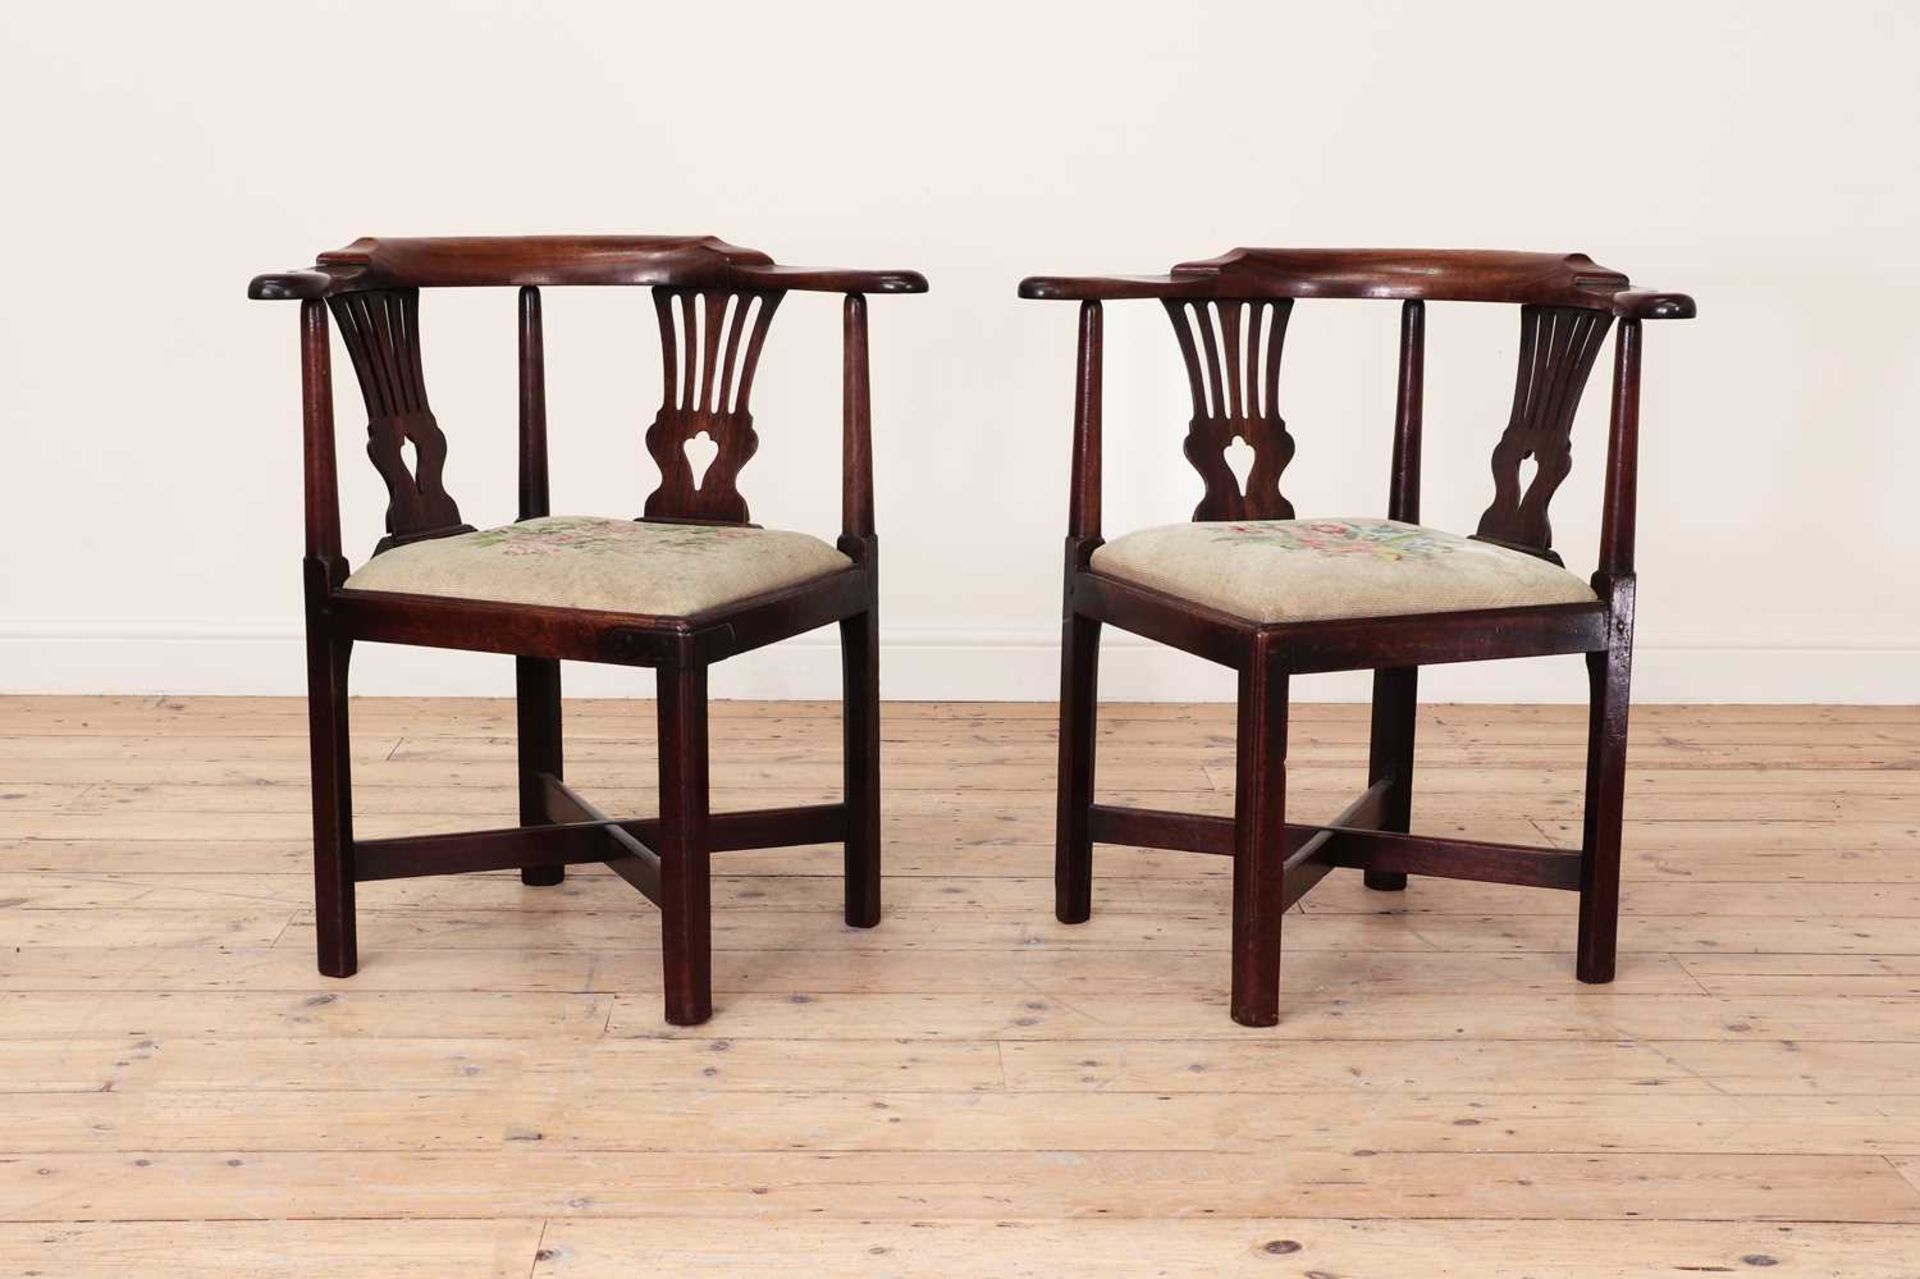 A pair of George III Chippendale period mahogany corner elbow chairs,